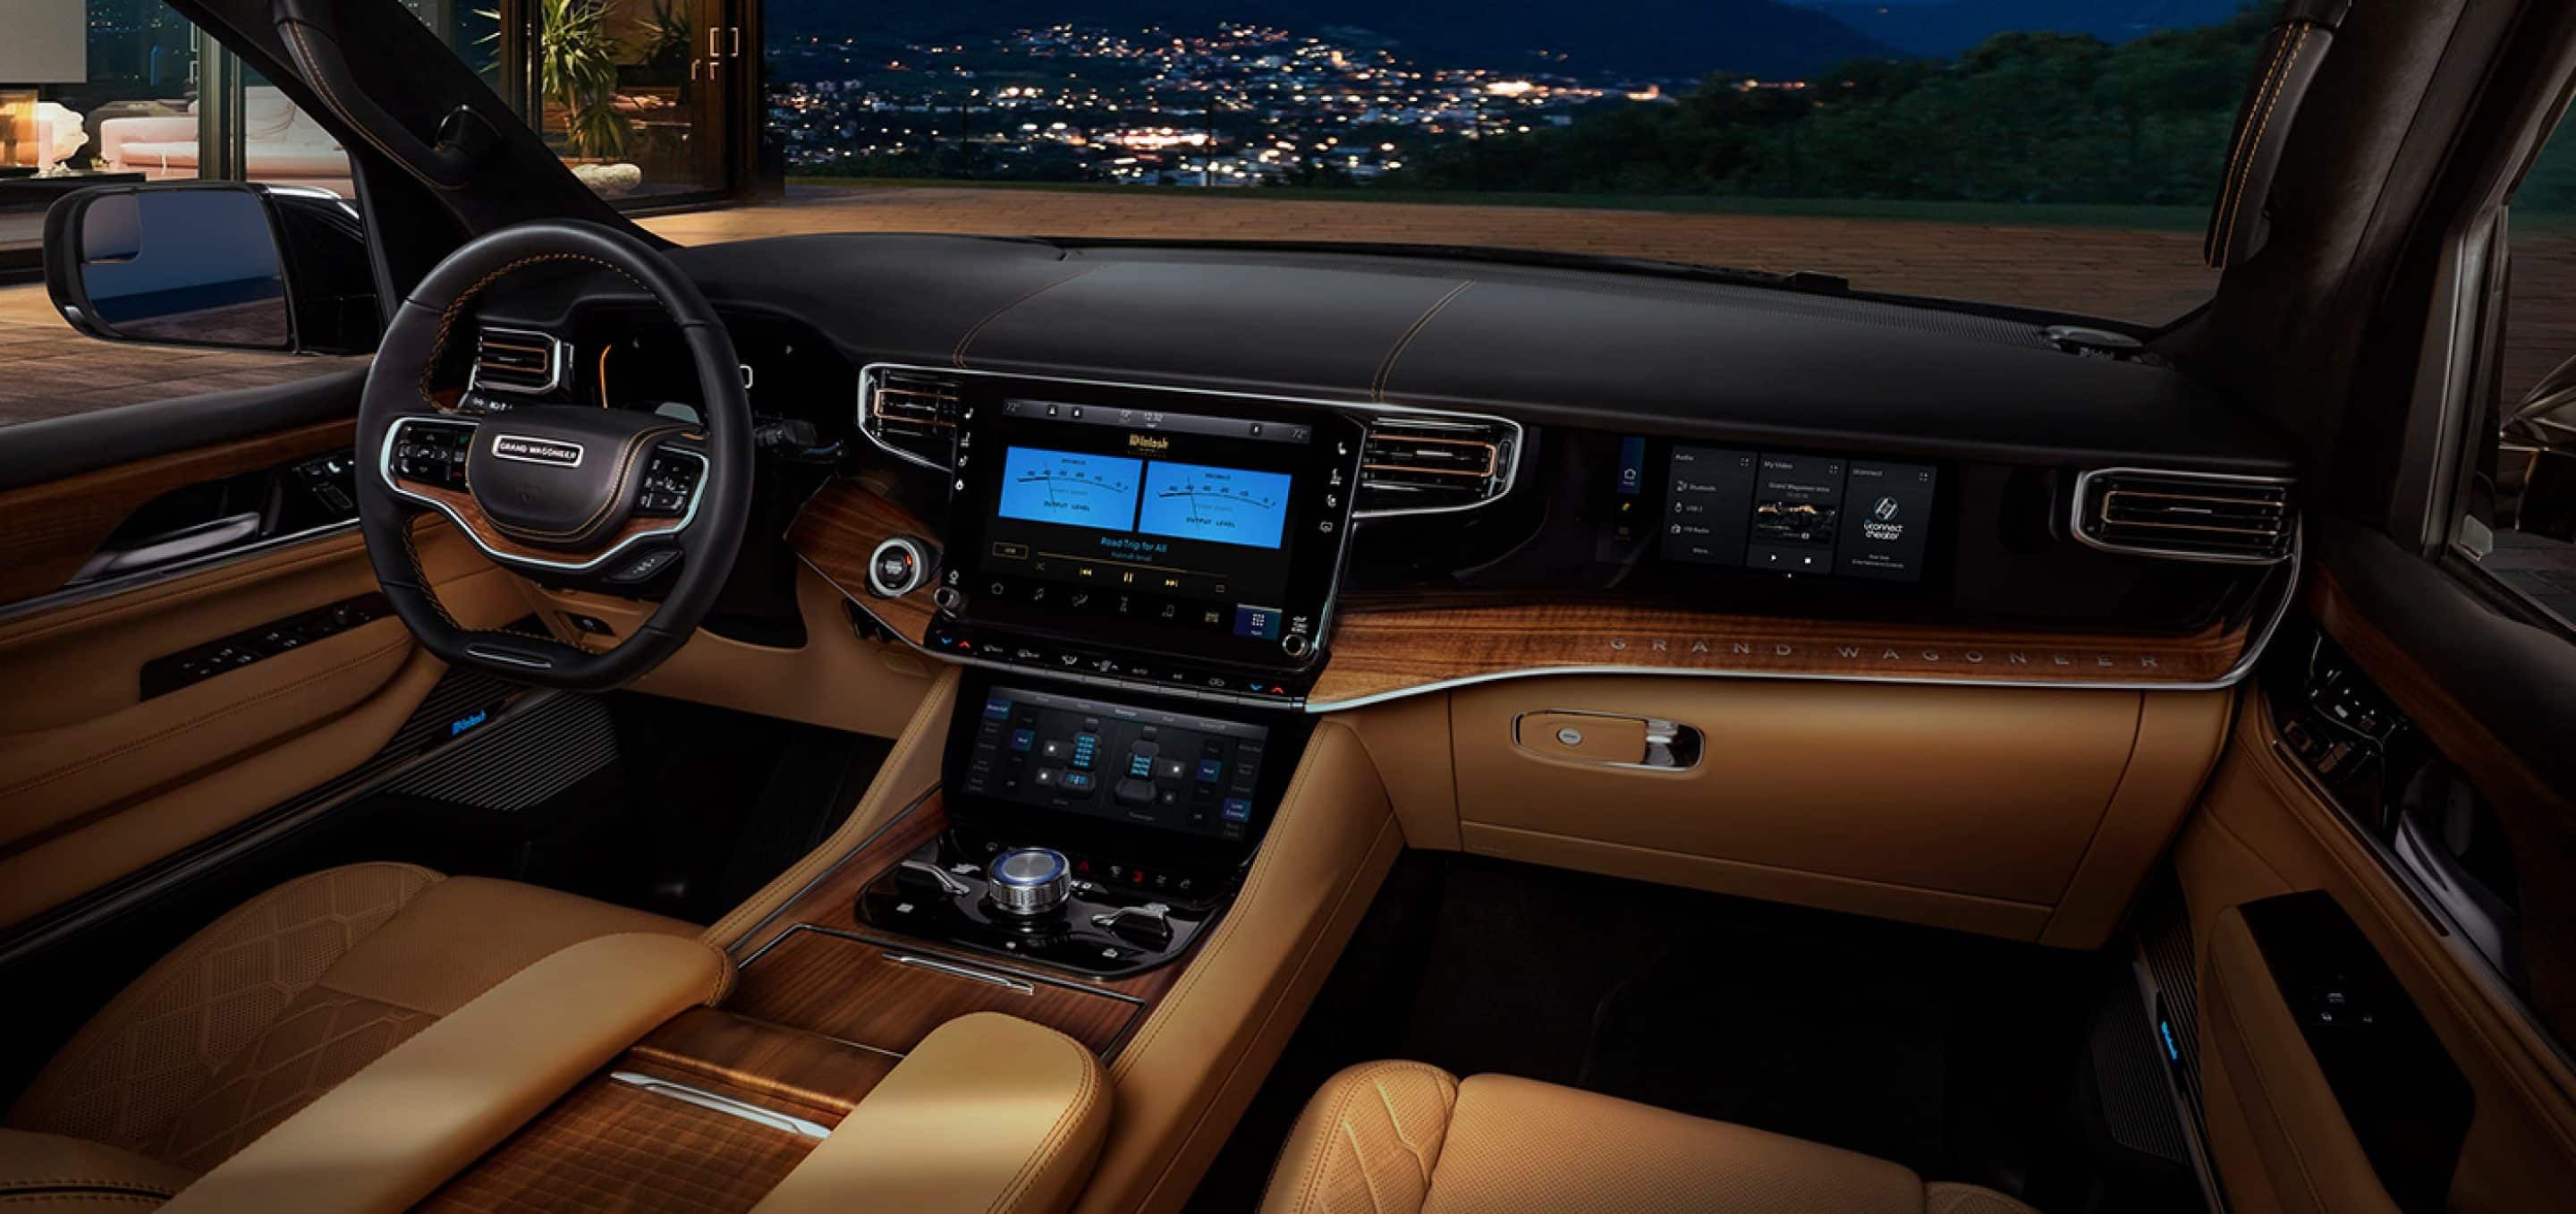 The display area in the 2022 Jeep Grand Wagoneer.